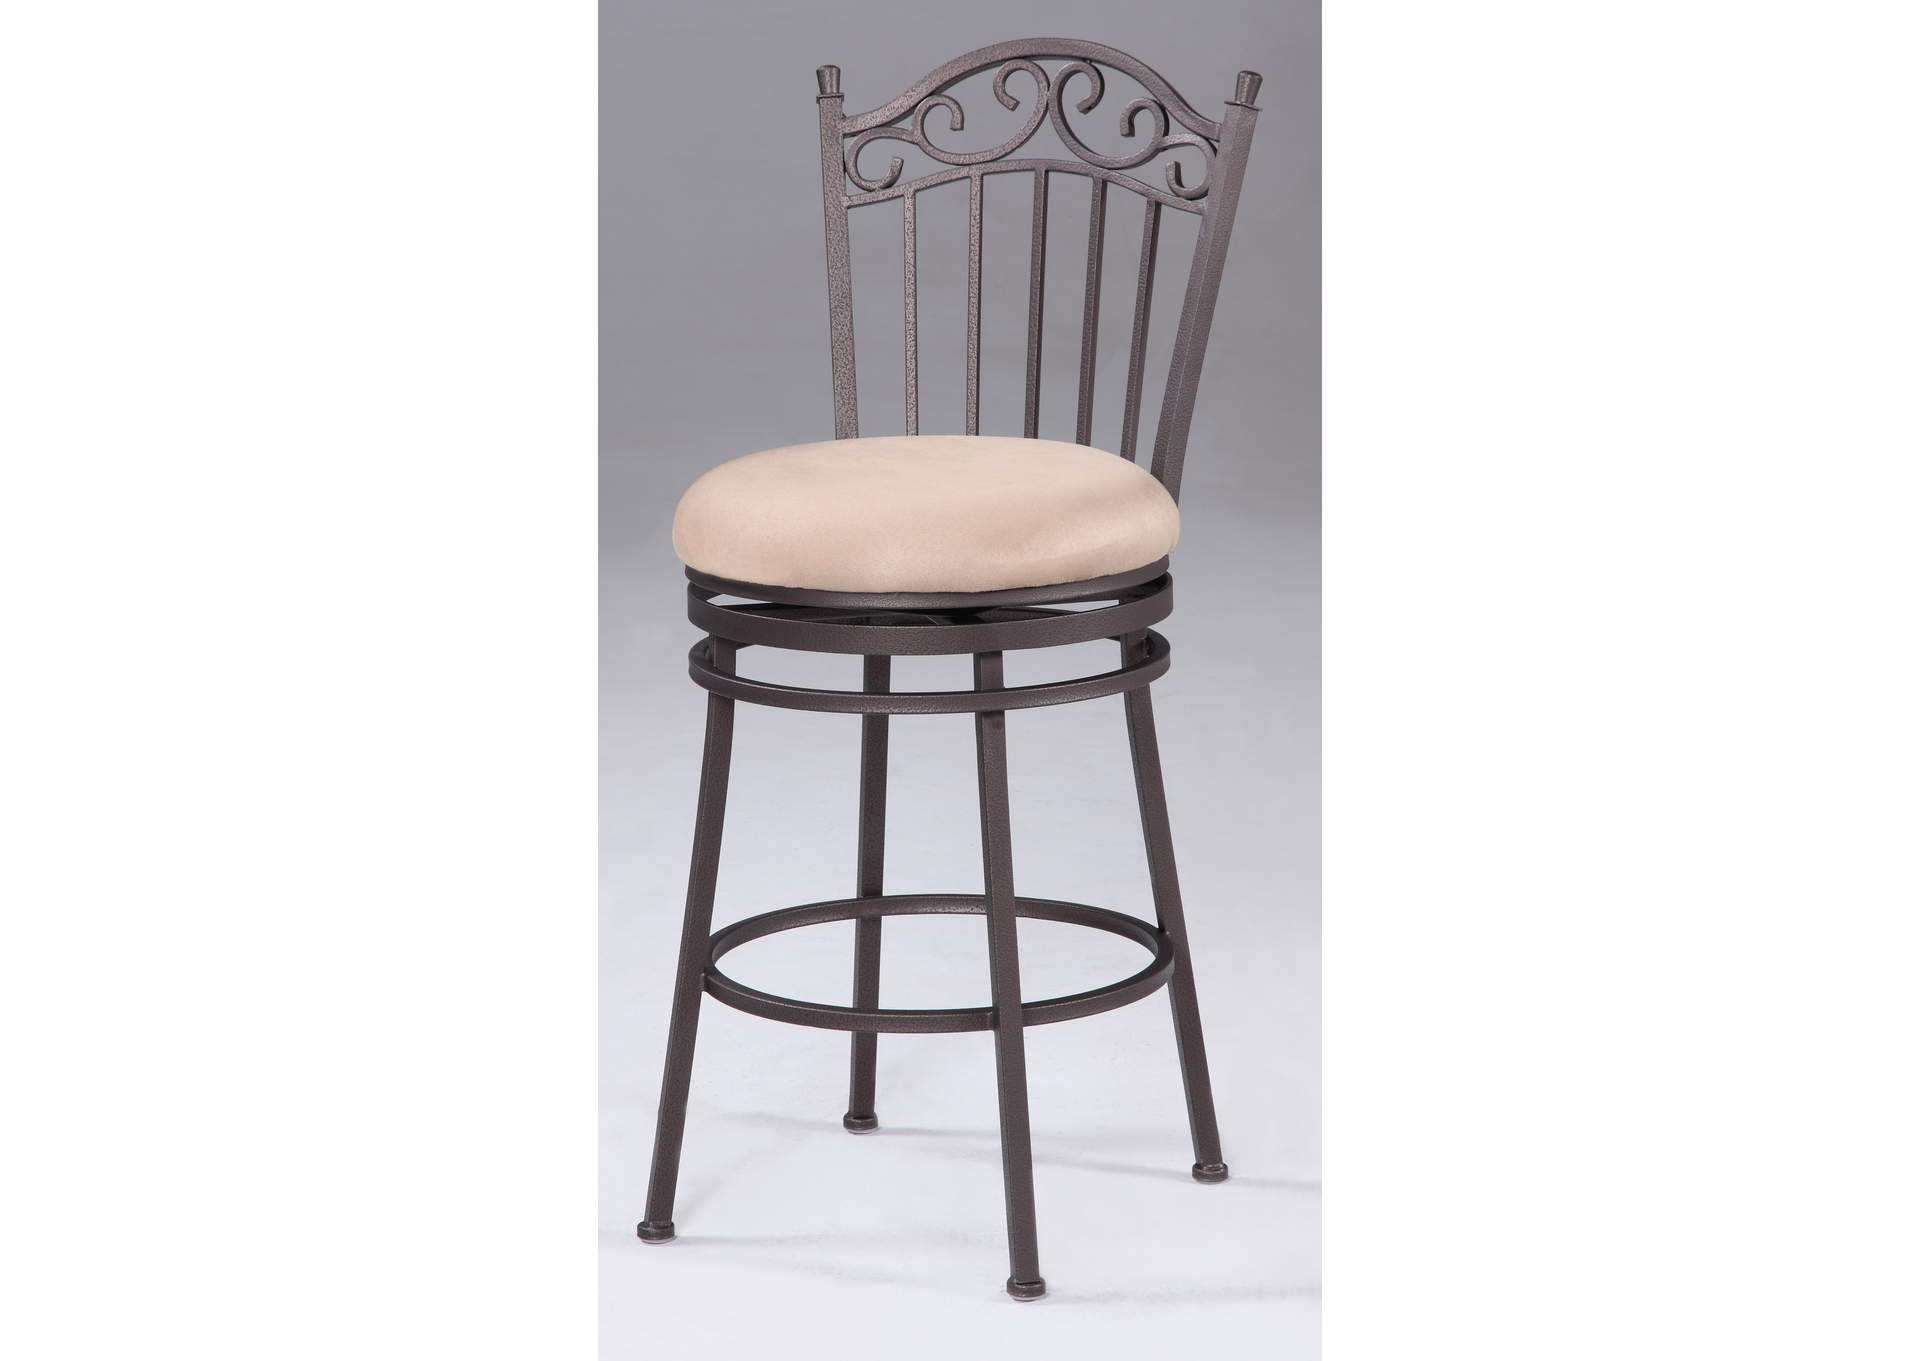 Counter Height Stool w/ Memory Return Swivel,Chintaly Imports